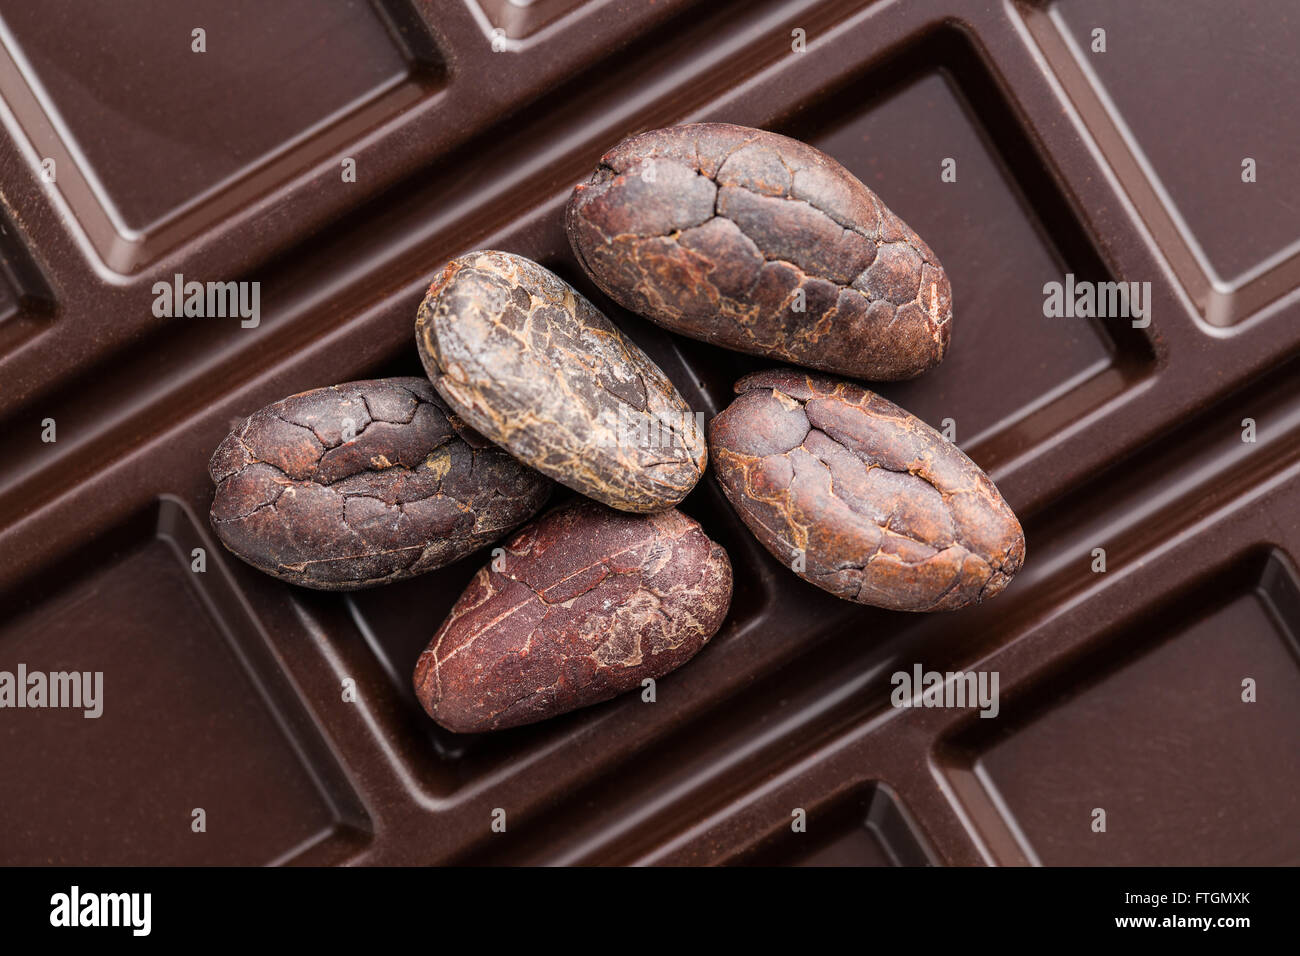 cocoa beans and chocolate bars on white background Stock Photo